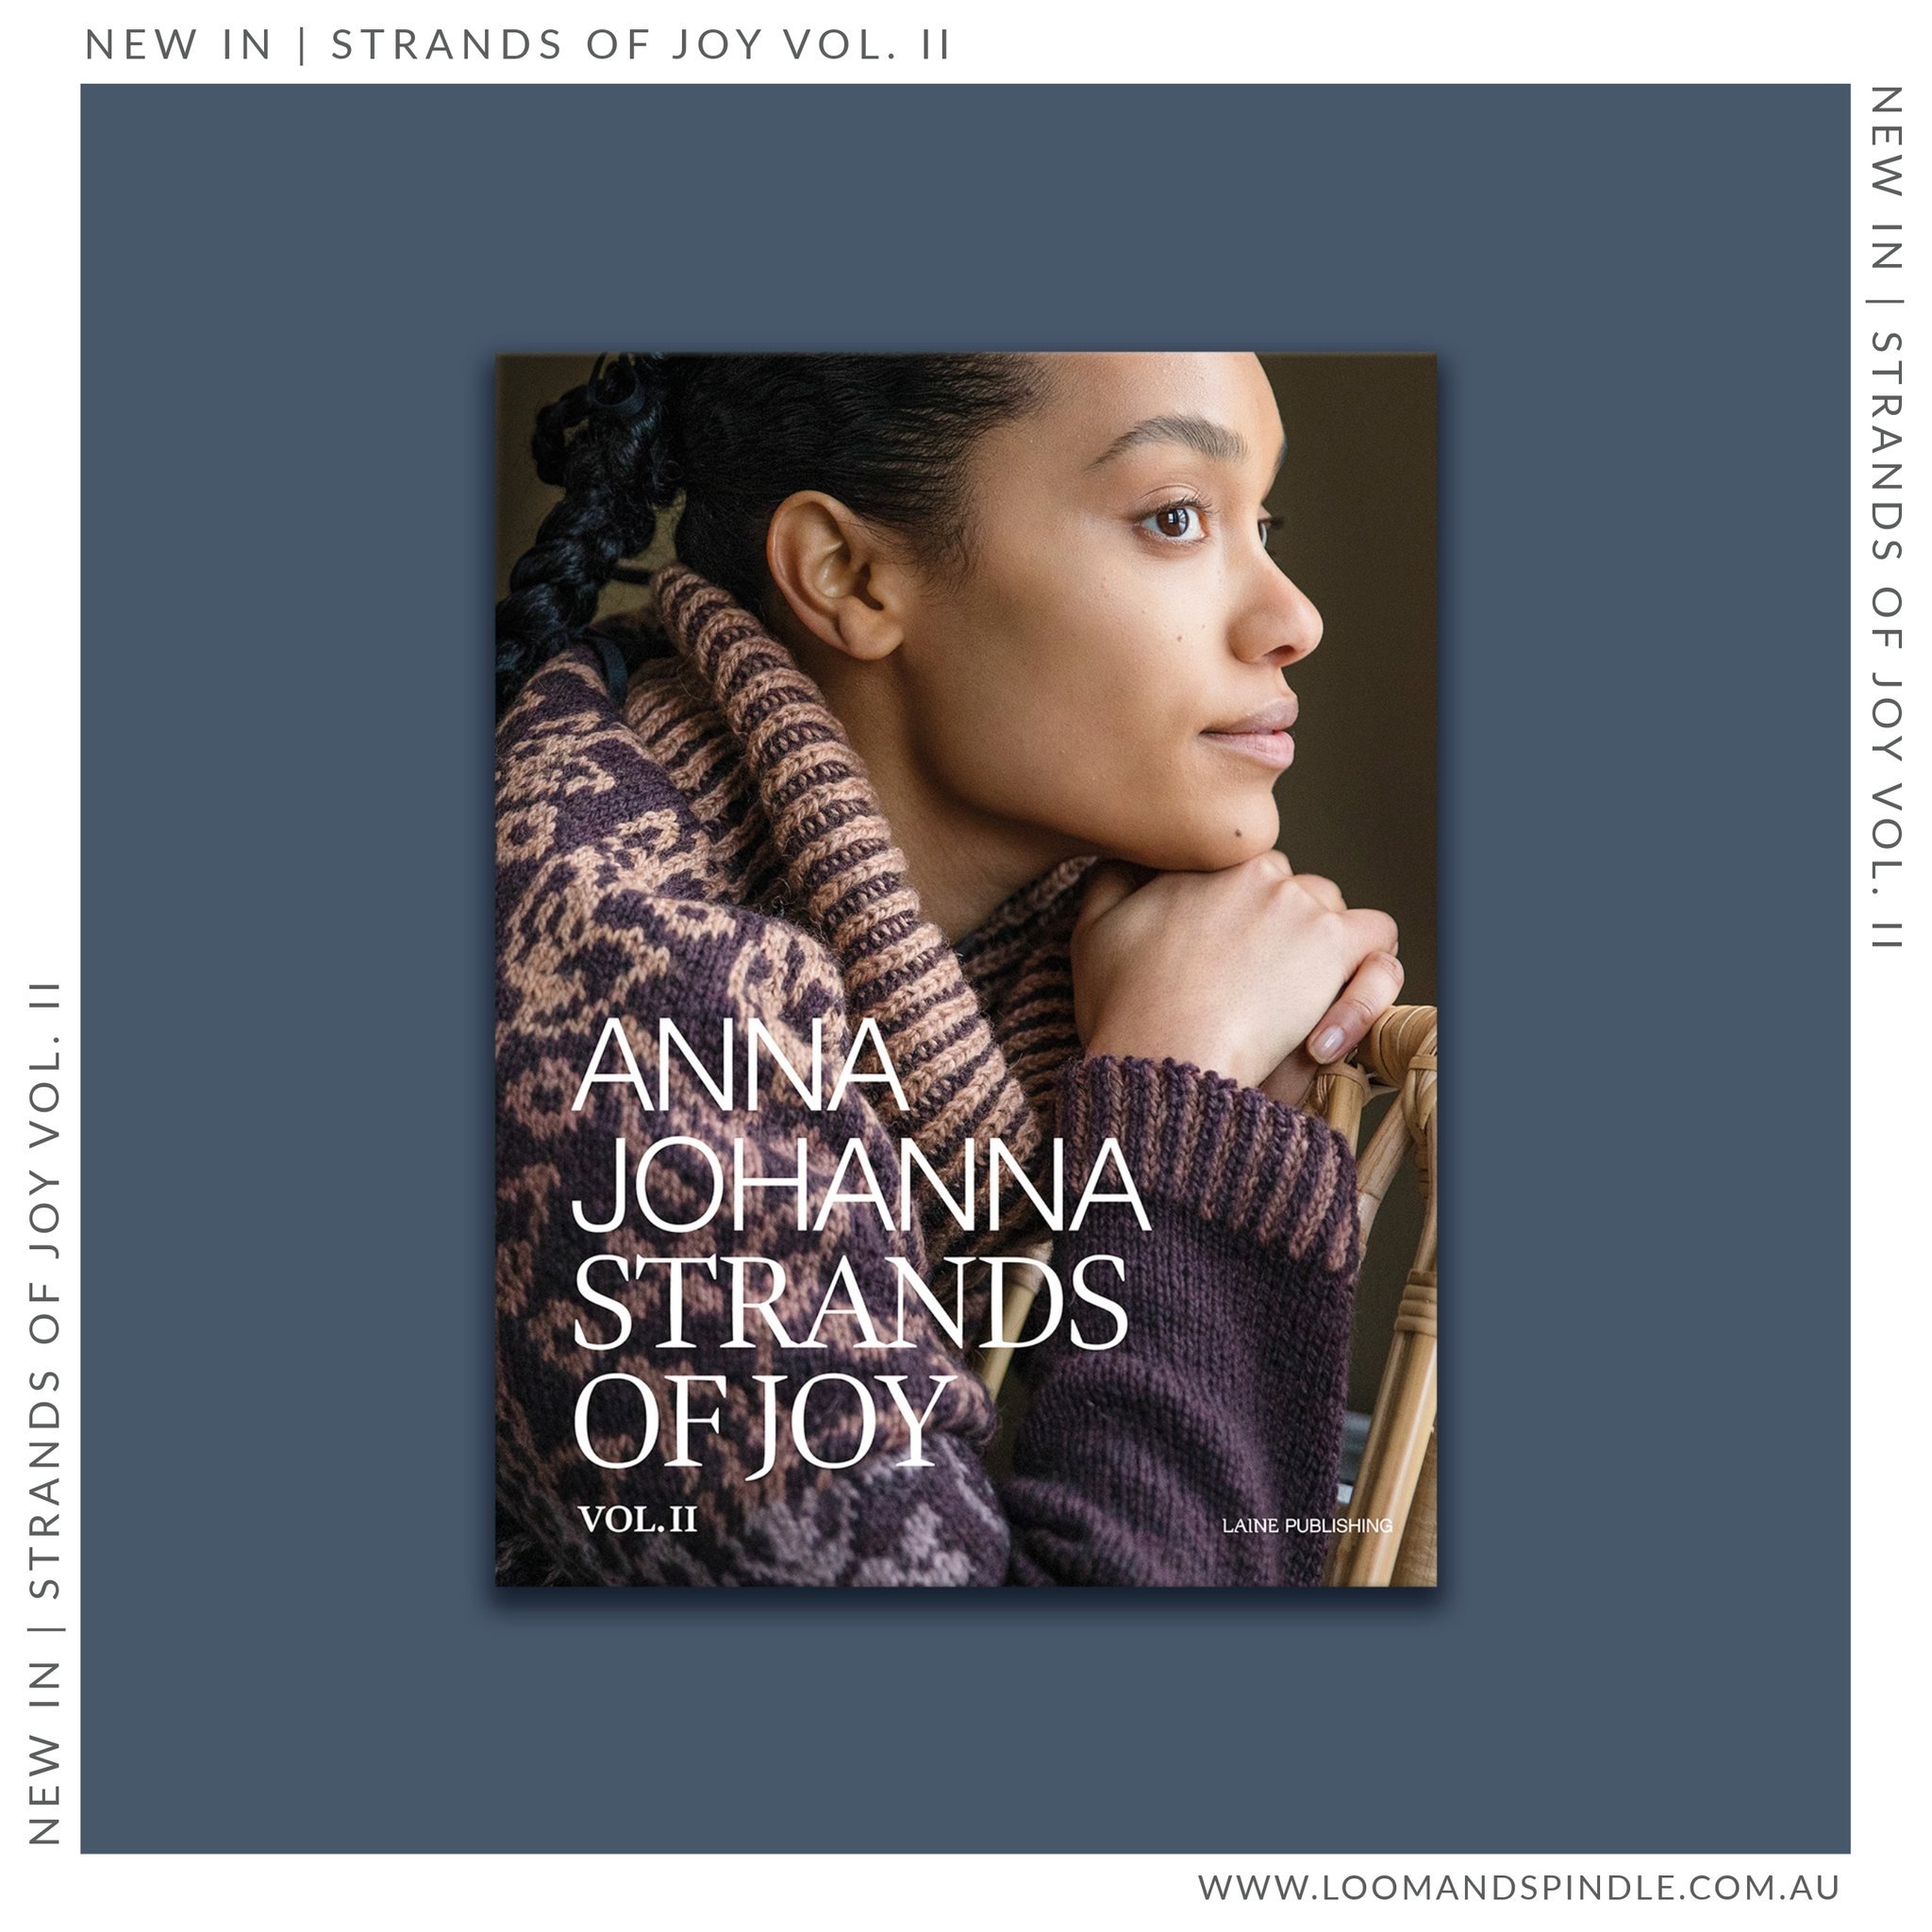 NEW IN | STRANDS OF JOY II

Strands of Joy II is the long-awaited sequel to Anna Johanna&rsquo;s popular first book. This new collection is centred around bold colourwork patterns and minimally processed wool yarns. The book contains 17 knitwear desi